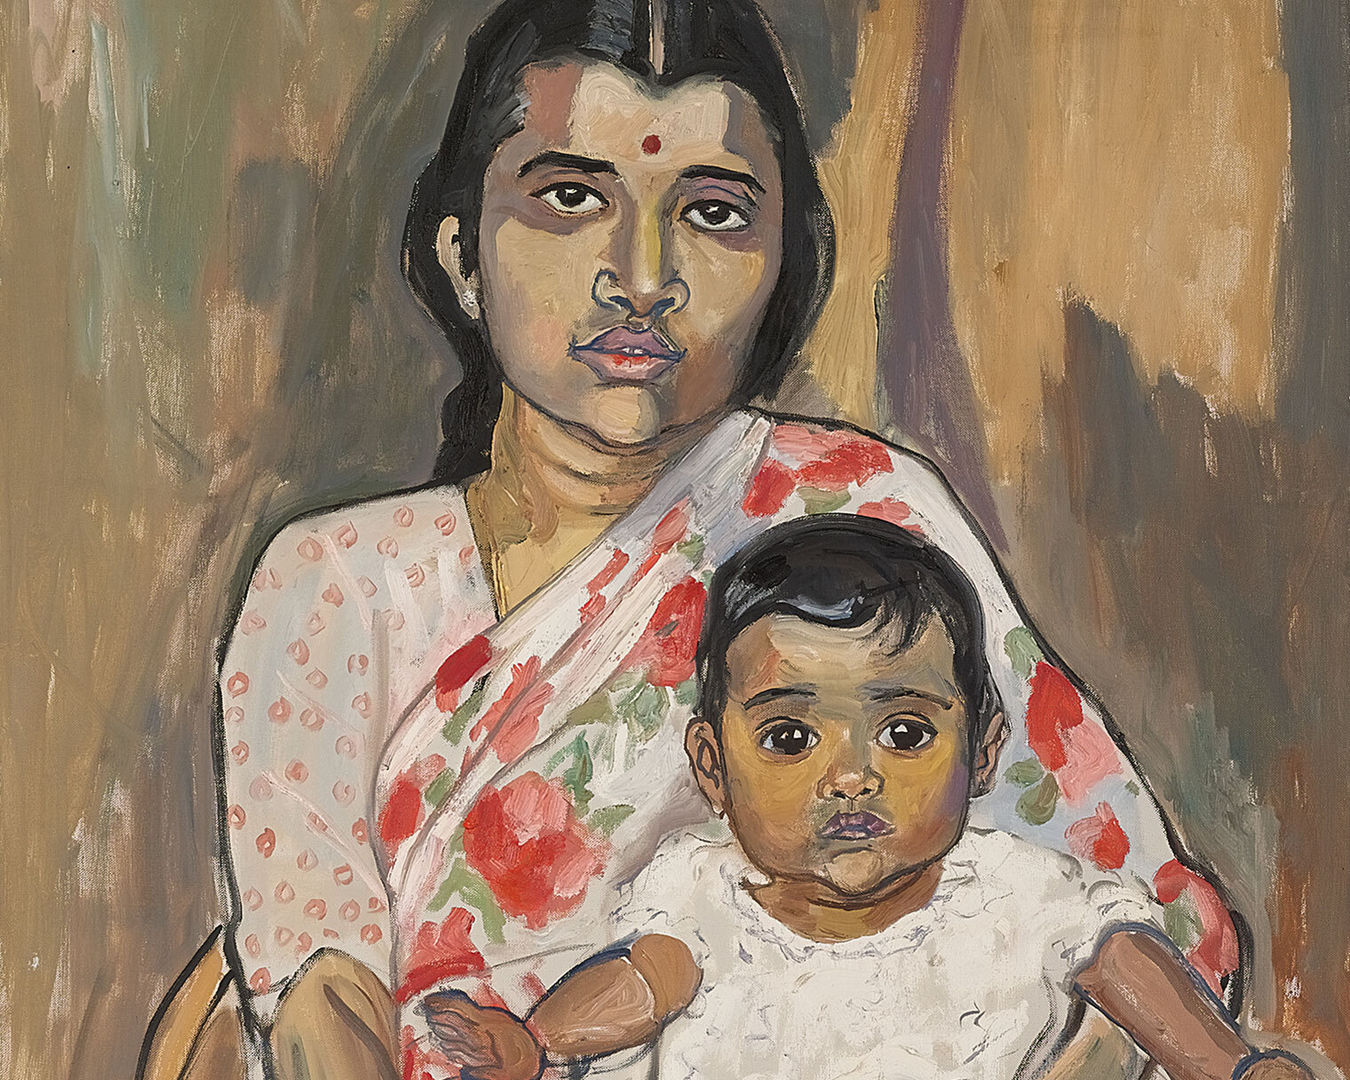 A painting of an Indian woman wearing a sari and holding a child